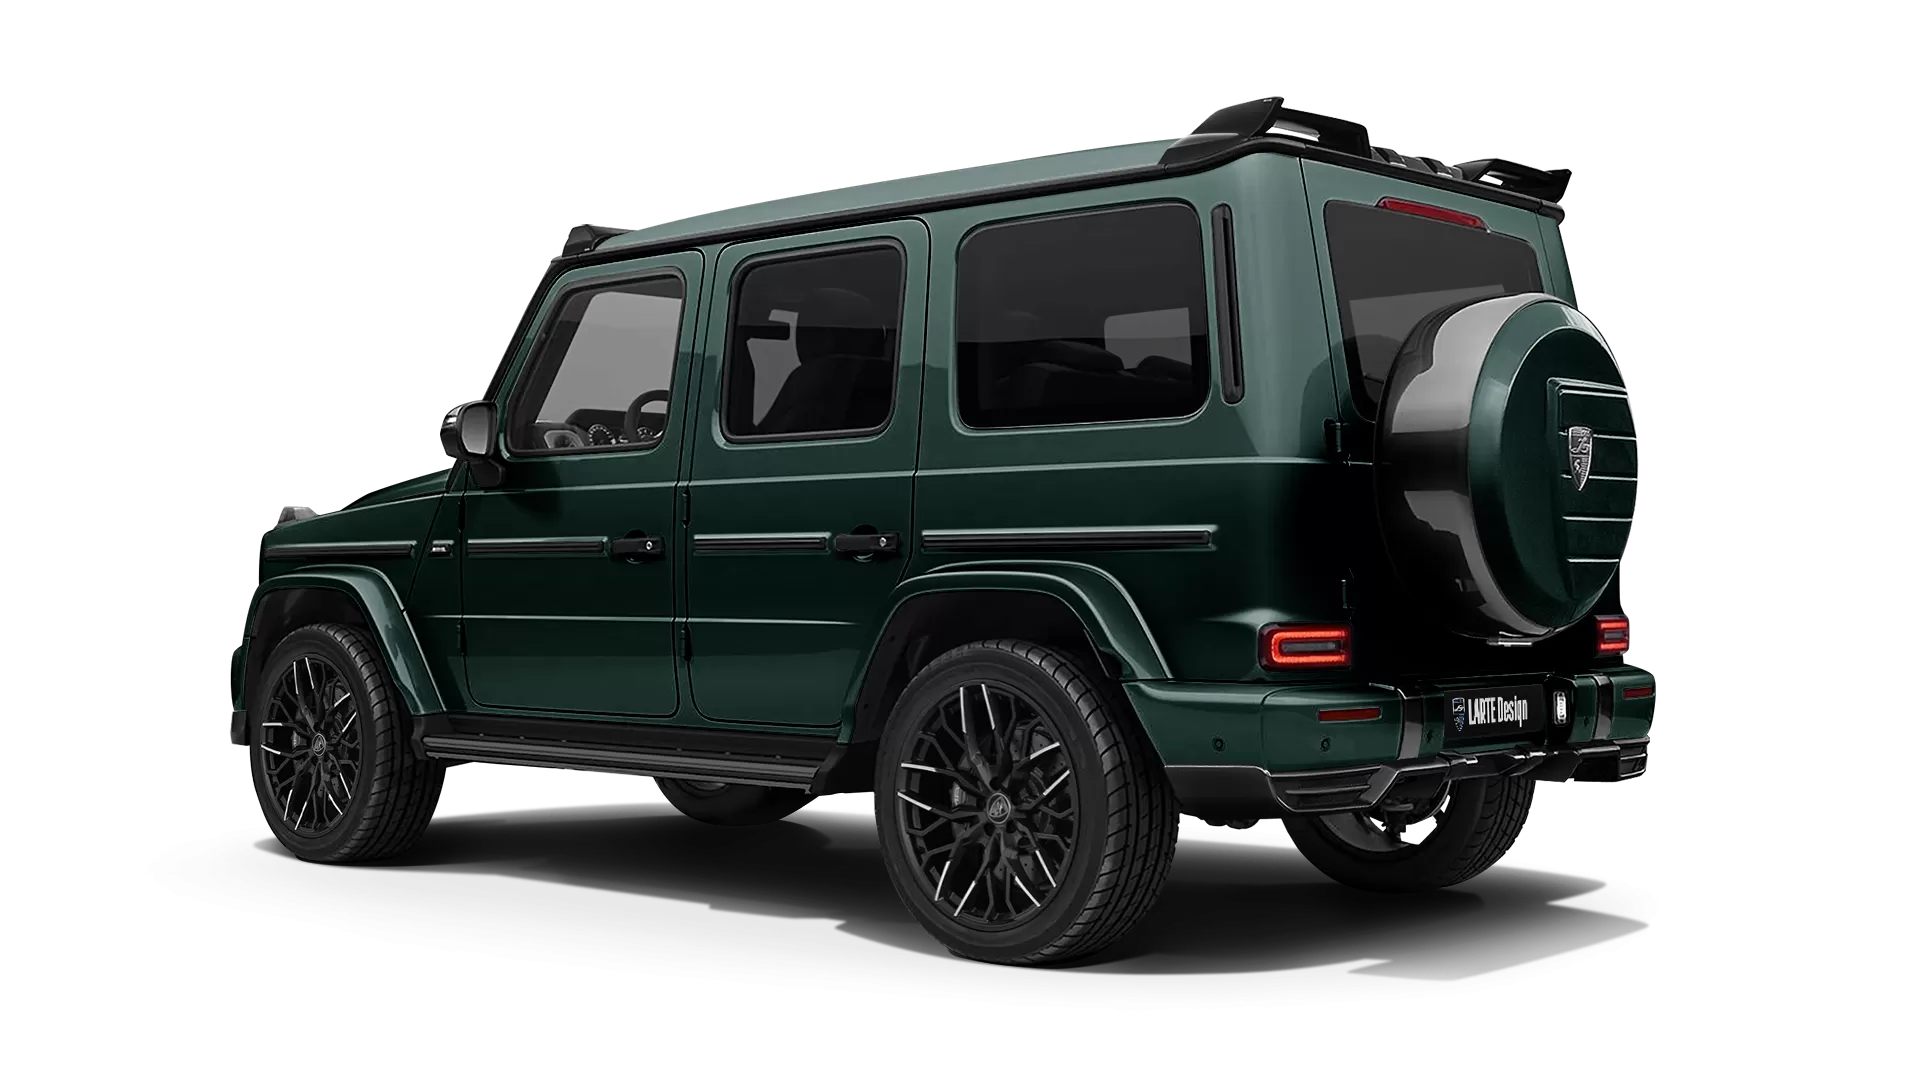 Mercedes G class W463 with painted body kit: rear view shown in Emerald Green